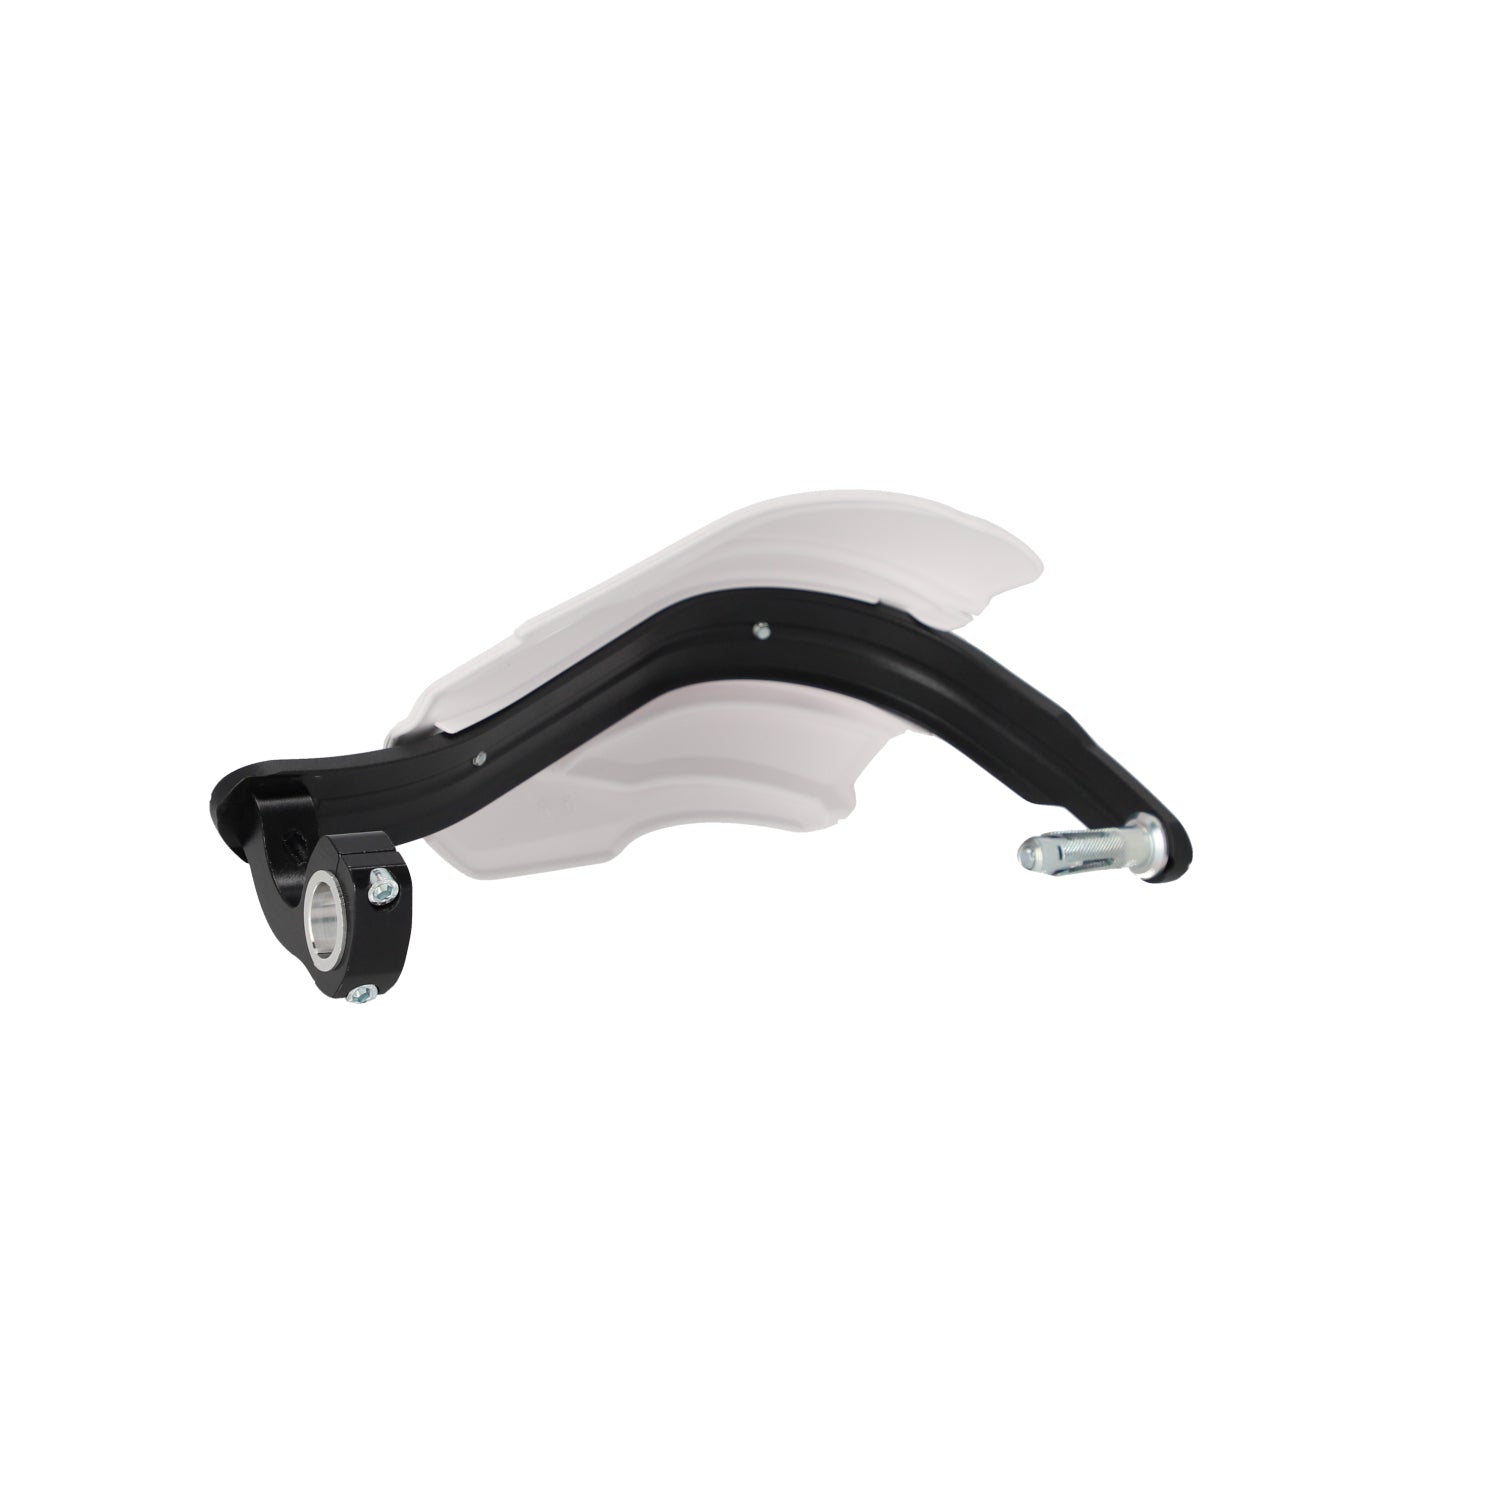 Acerbis Endurance-X Handguards complete with fitting kit White/Black